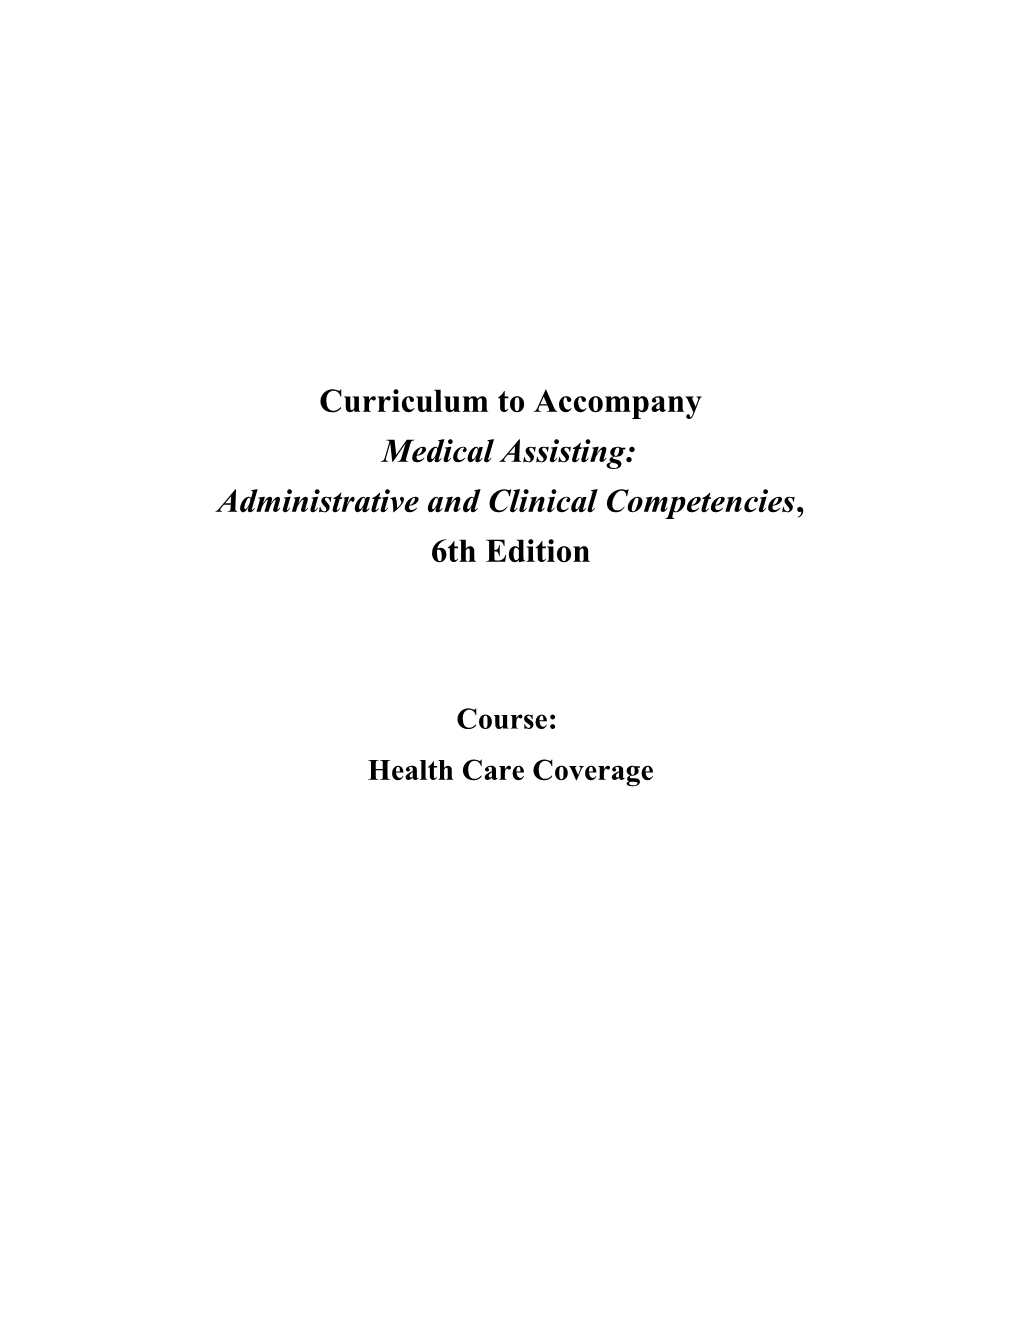 Administrative and Clinical Competencies